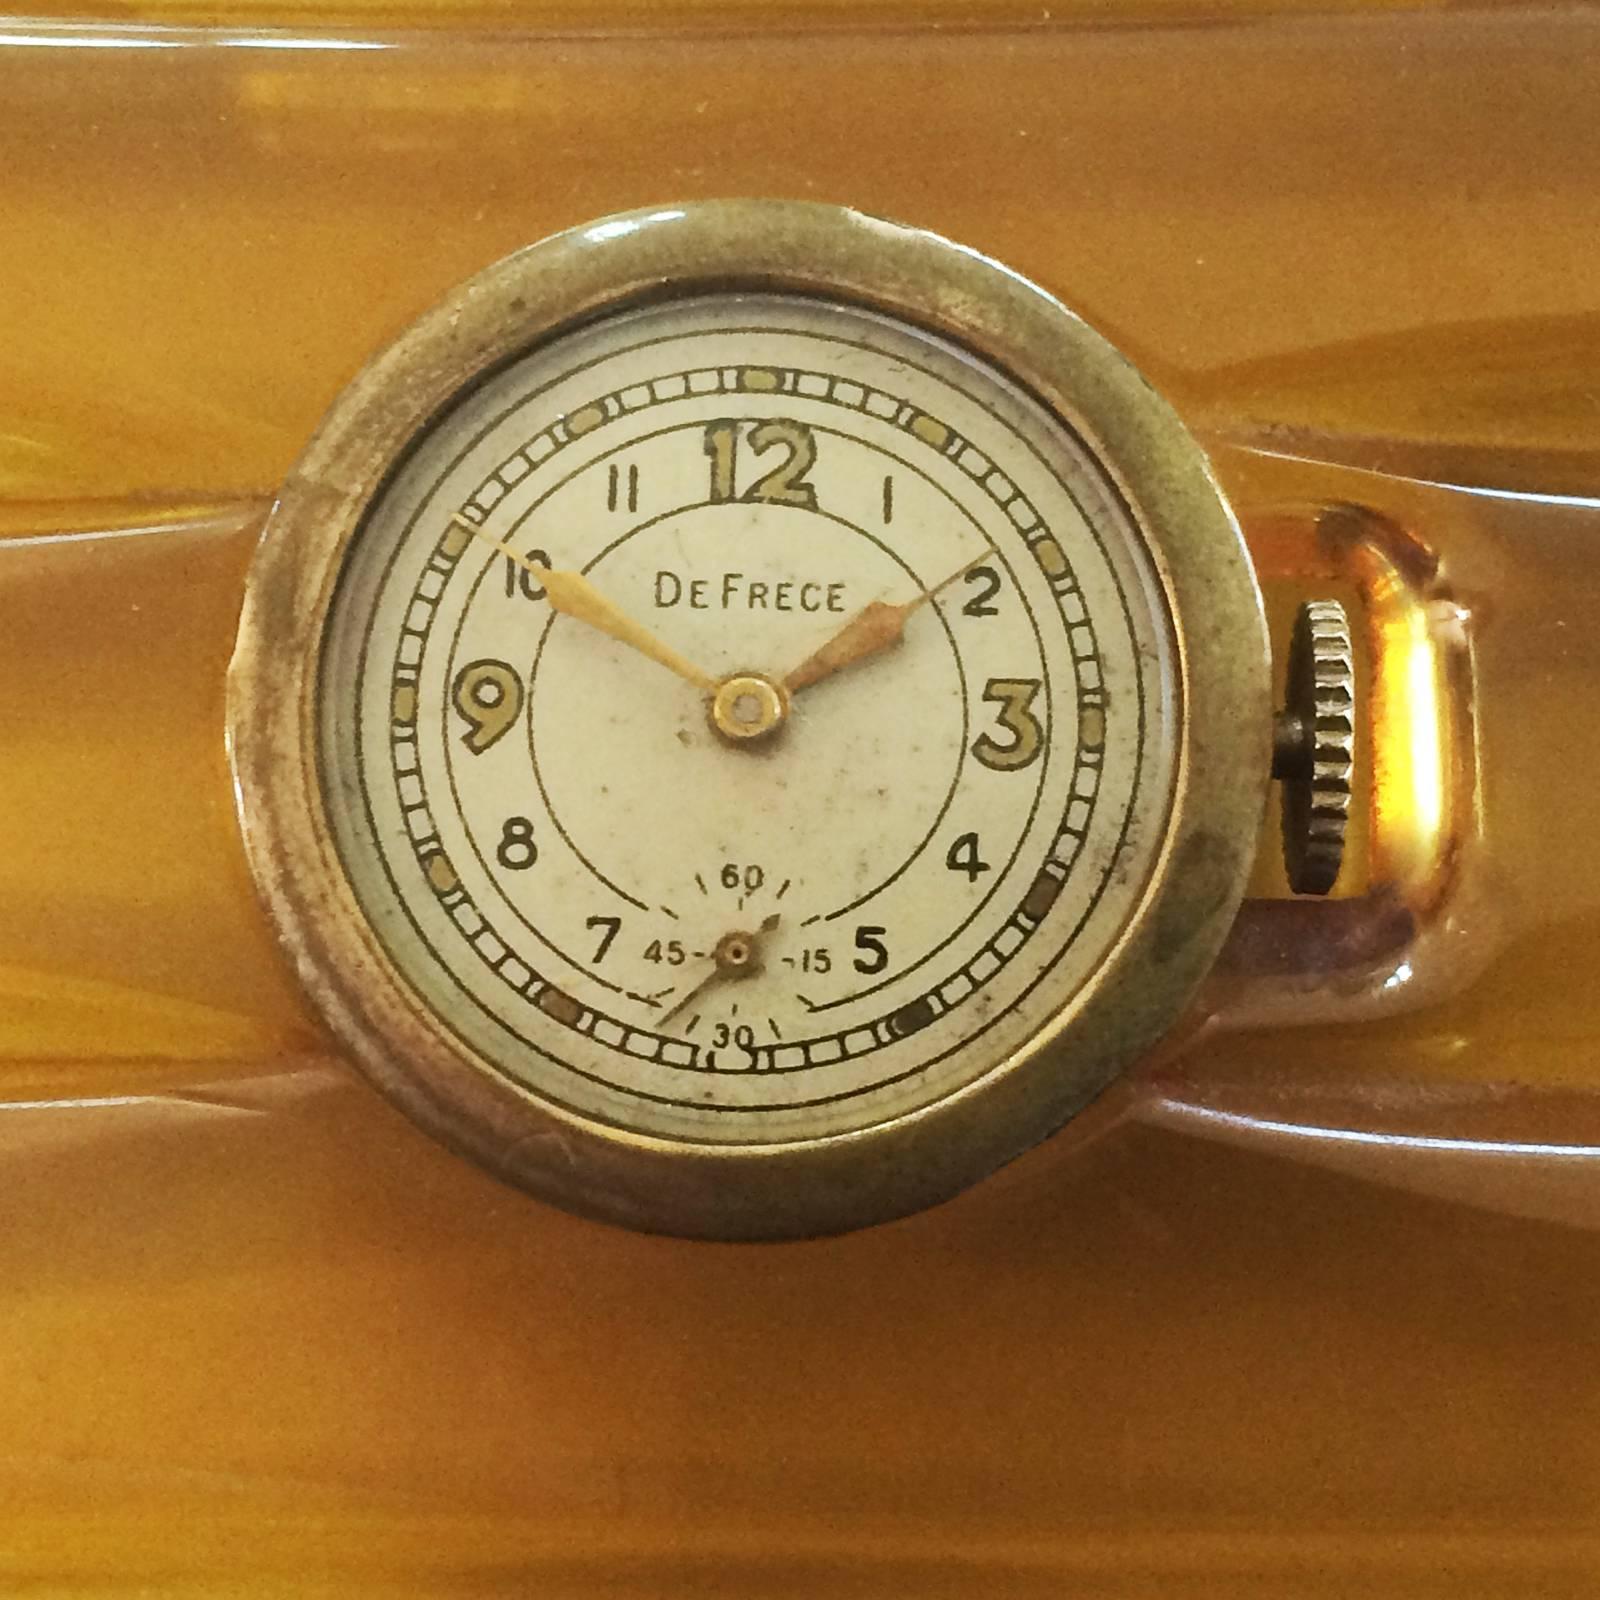 Art Deco Apple juice Coloured Bakelite Card Case fitted with Skeleton backed Watch set into the lid. The watch is by De Frece Watch Co., Inc., 48 W. 48th St., New York, imported fine Swiss made watches such as this one, in the 1930’s and 1940’s. It